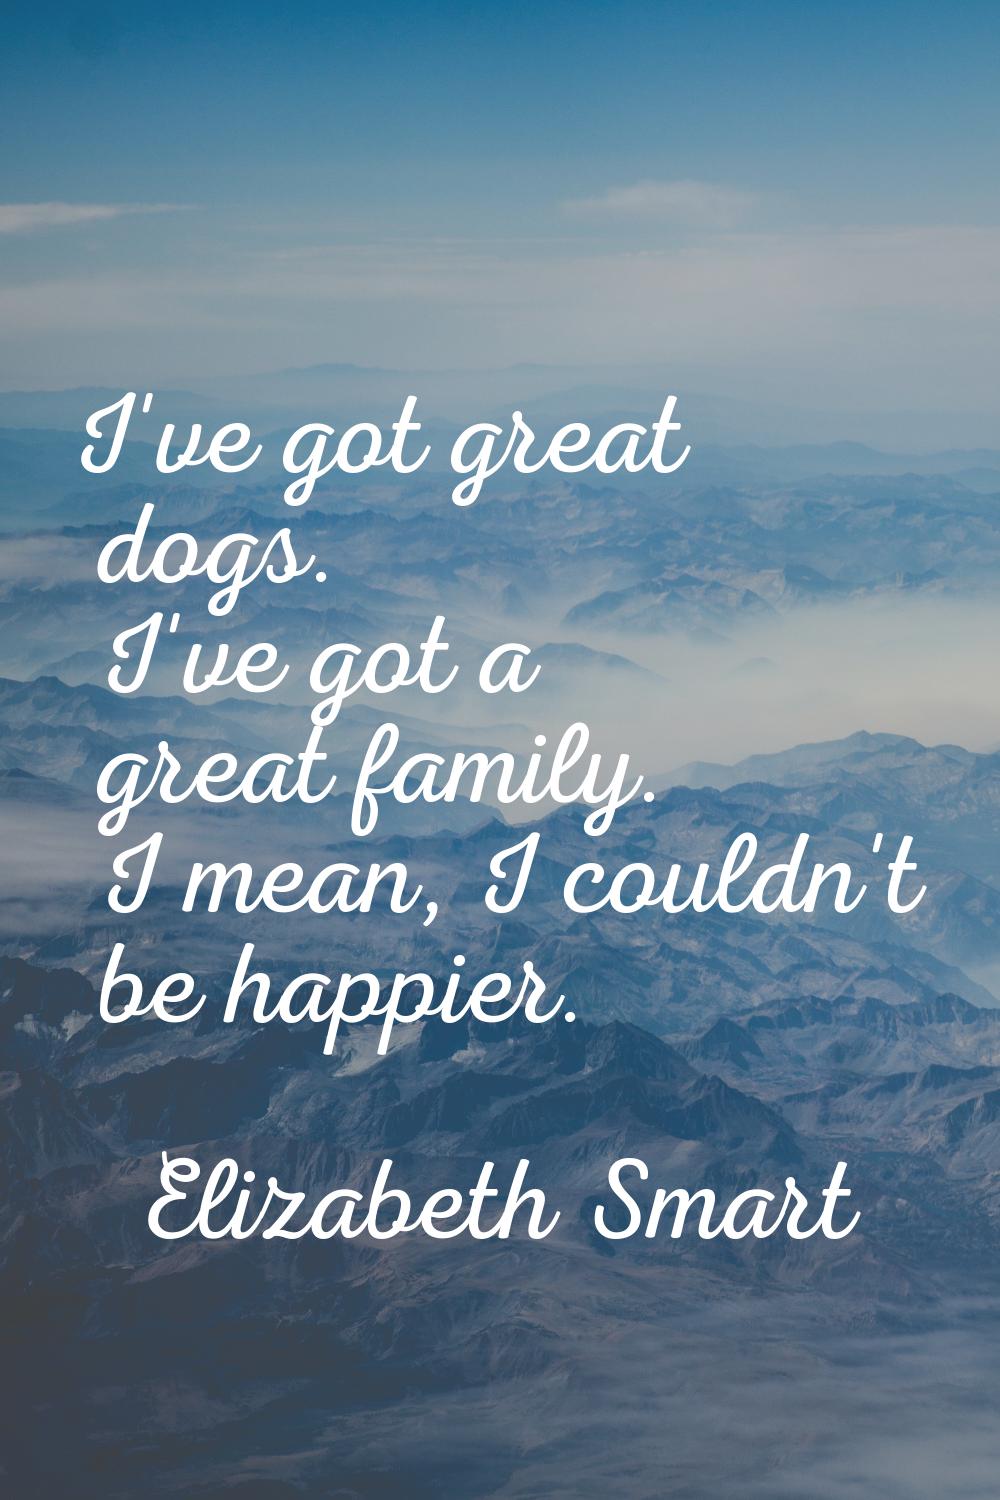 I've got great dogs. I've got a great family. I mean, I couldn't be happier.